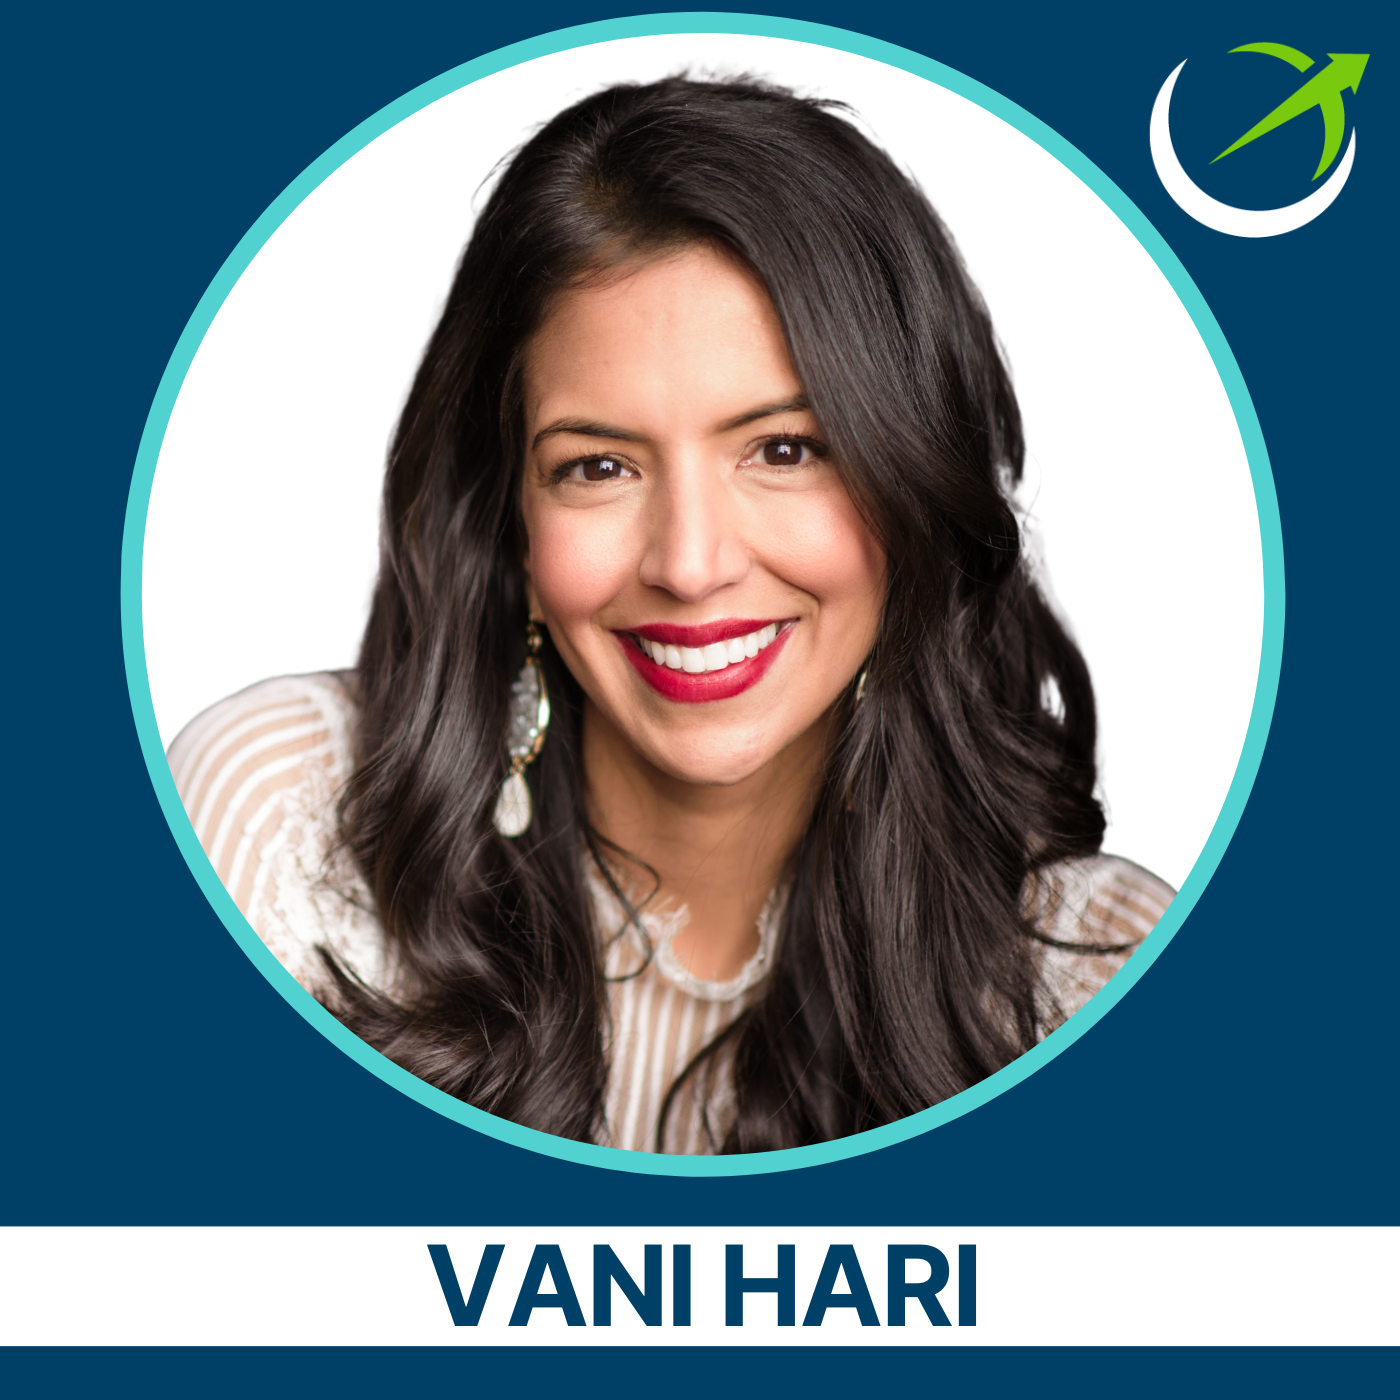 Eating Healthy At Parties, Hidden Toxins In Your Children's "Health Food," Why Baby Food Has MSG & More With Food Babe Vani Hari.